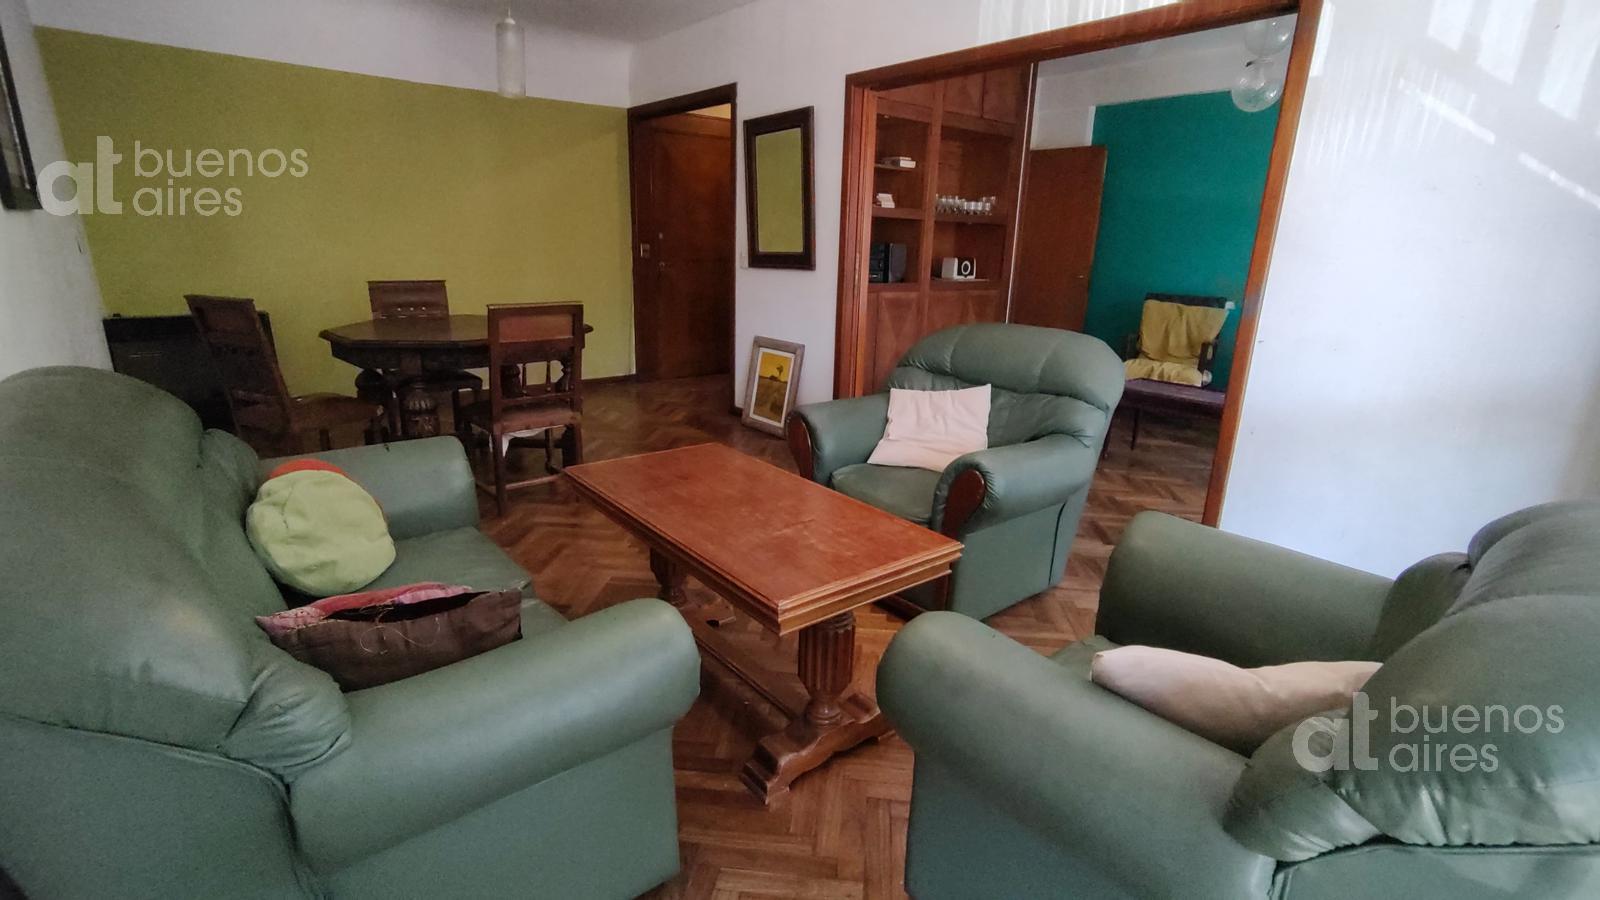 #5169298 | Temporary Rental | Apartment | Vicente Lopez (At Buenos Aires)